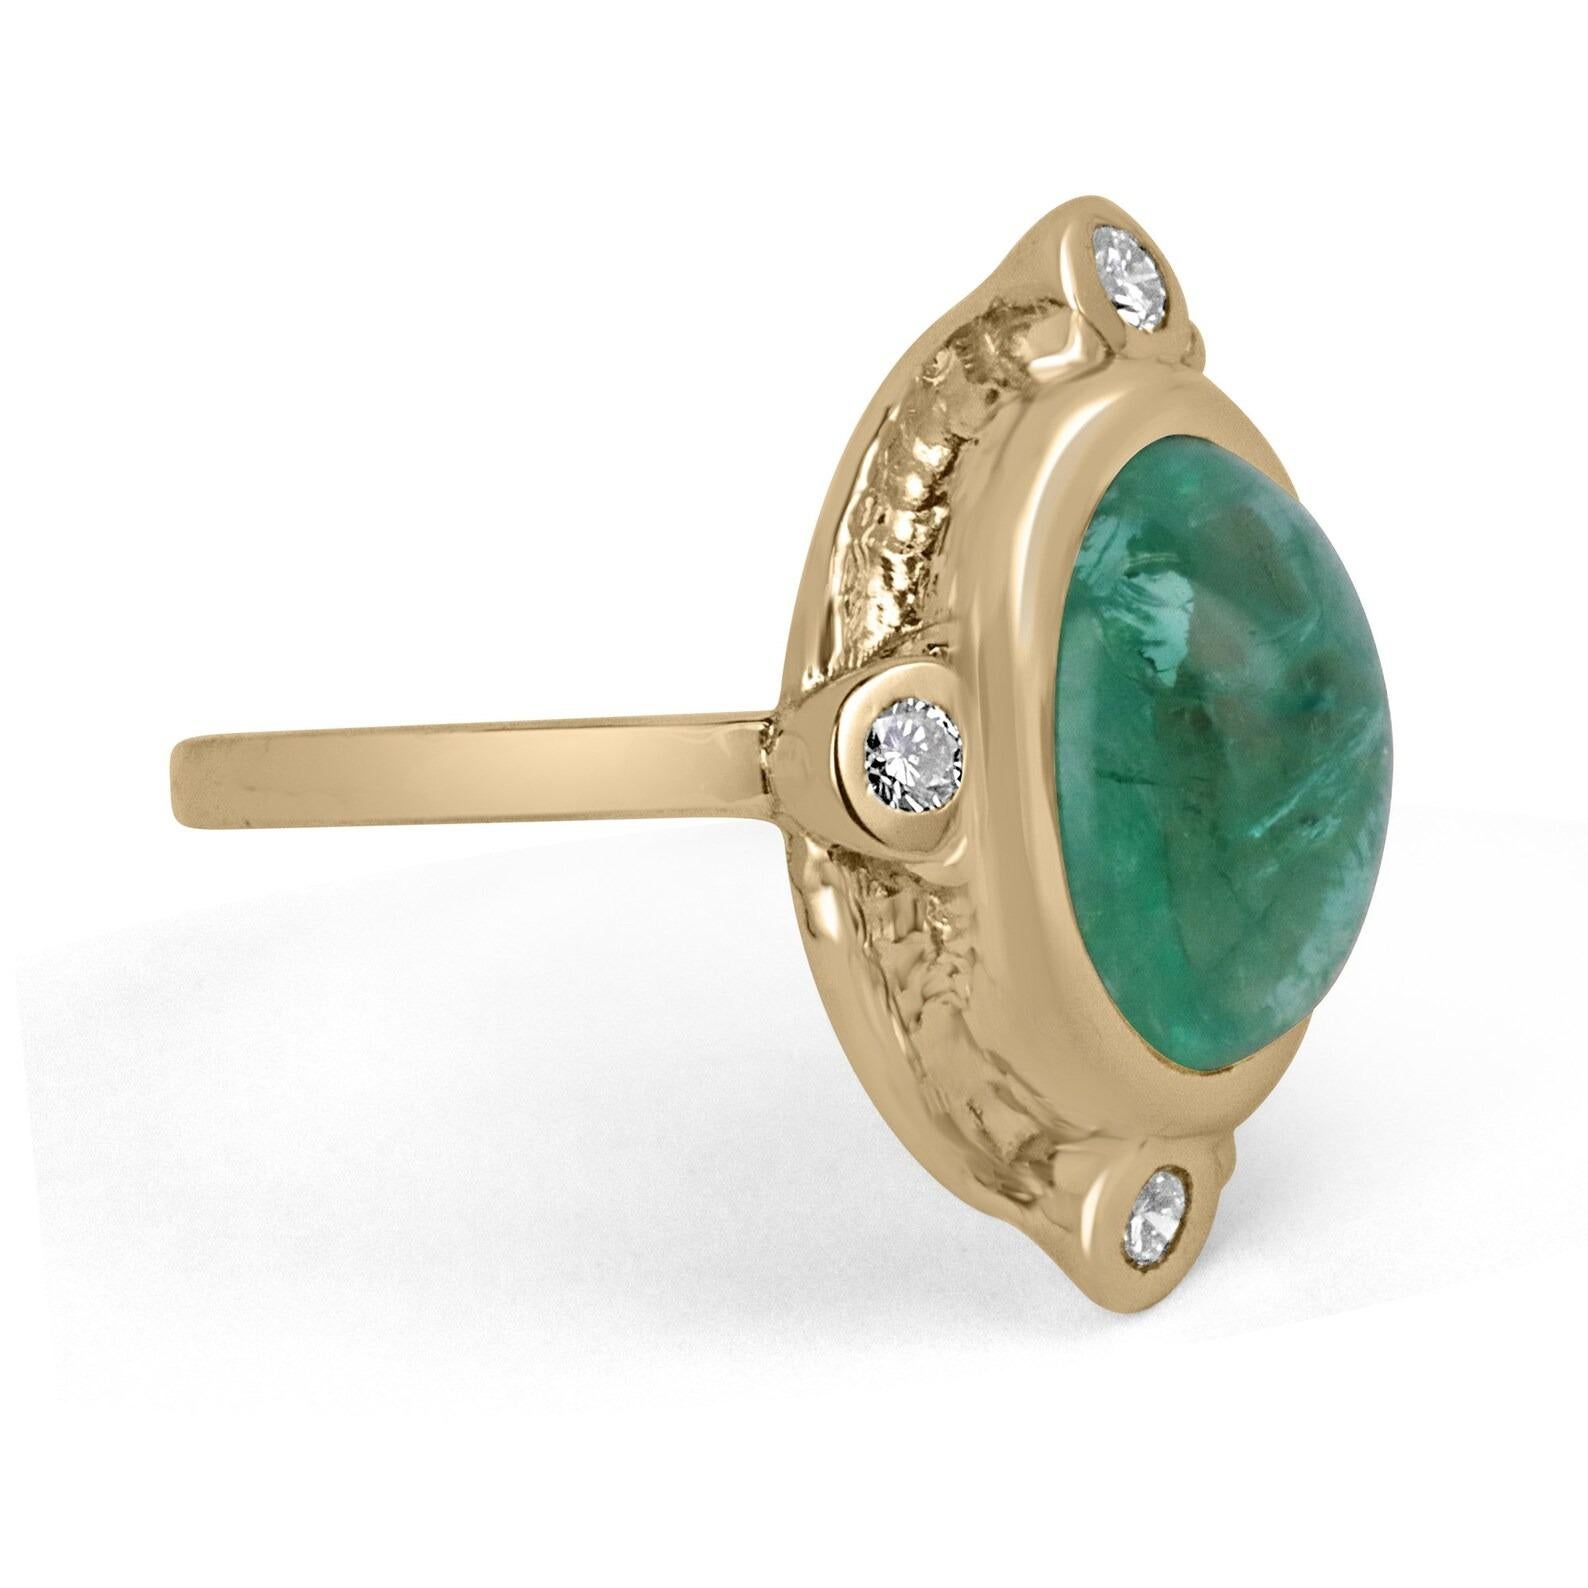 A vintage-styled, cabochon emerald and diamond accent ring. This treasure features a remarkable cabochon cut oval-shaped emerald with a ravishing medium bluish-green color, followed along with very good clarity and luster. But we haven't even got to